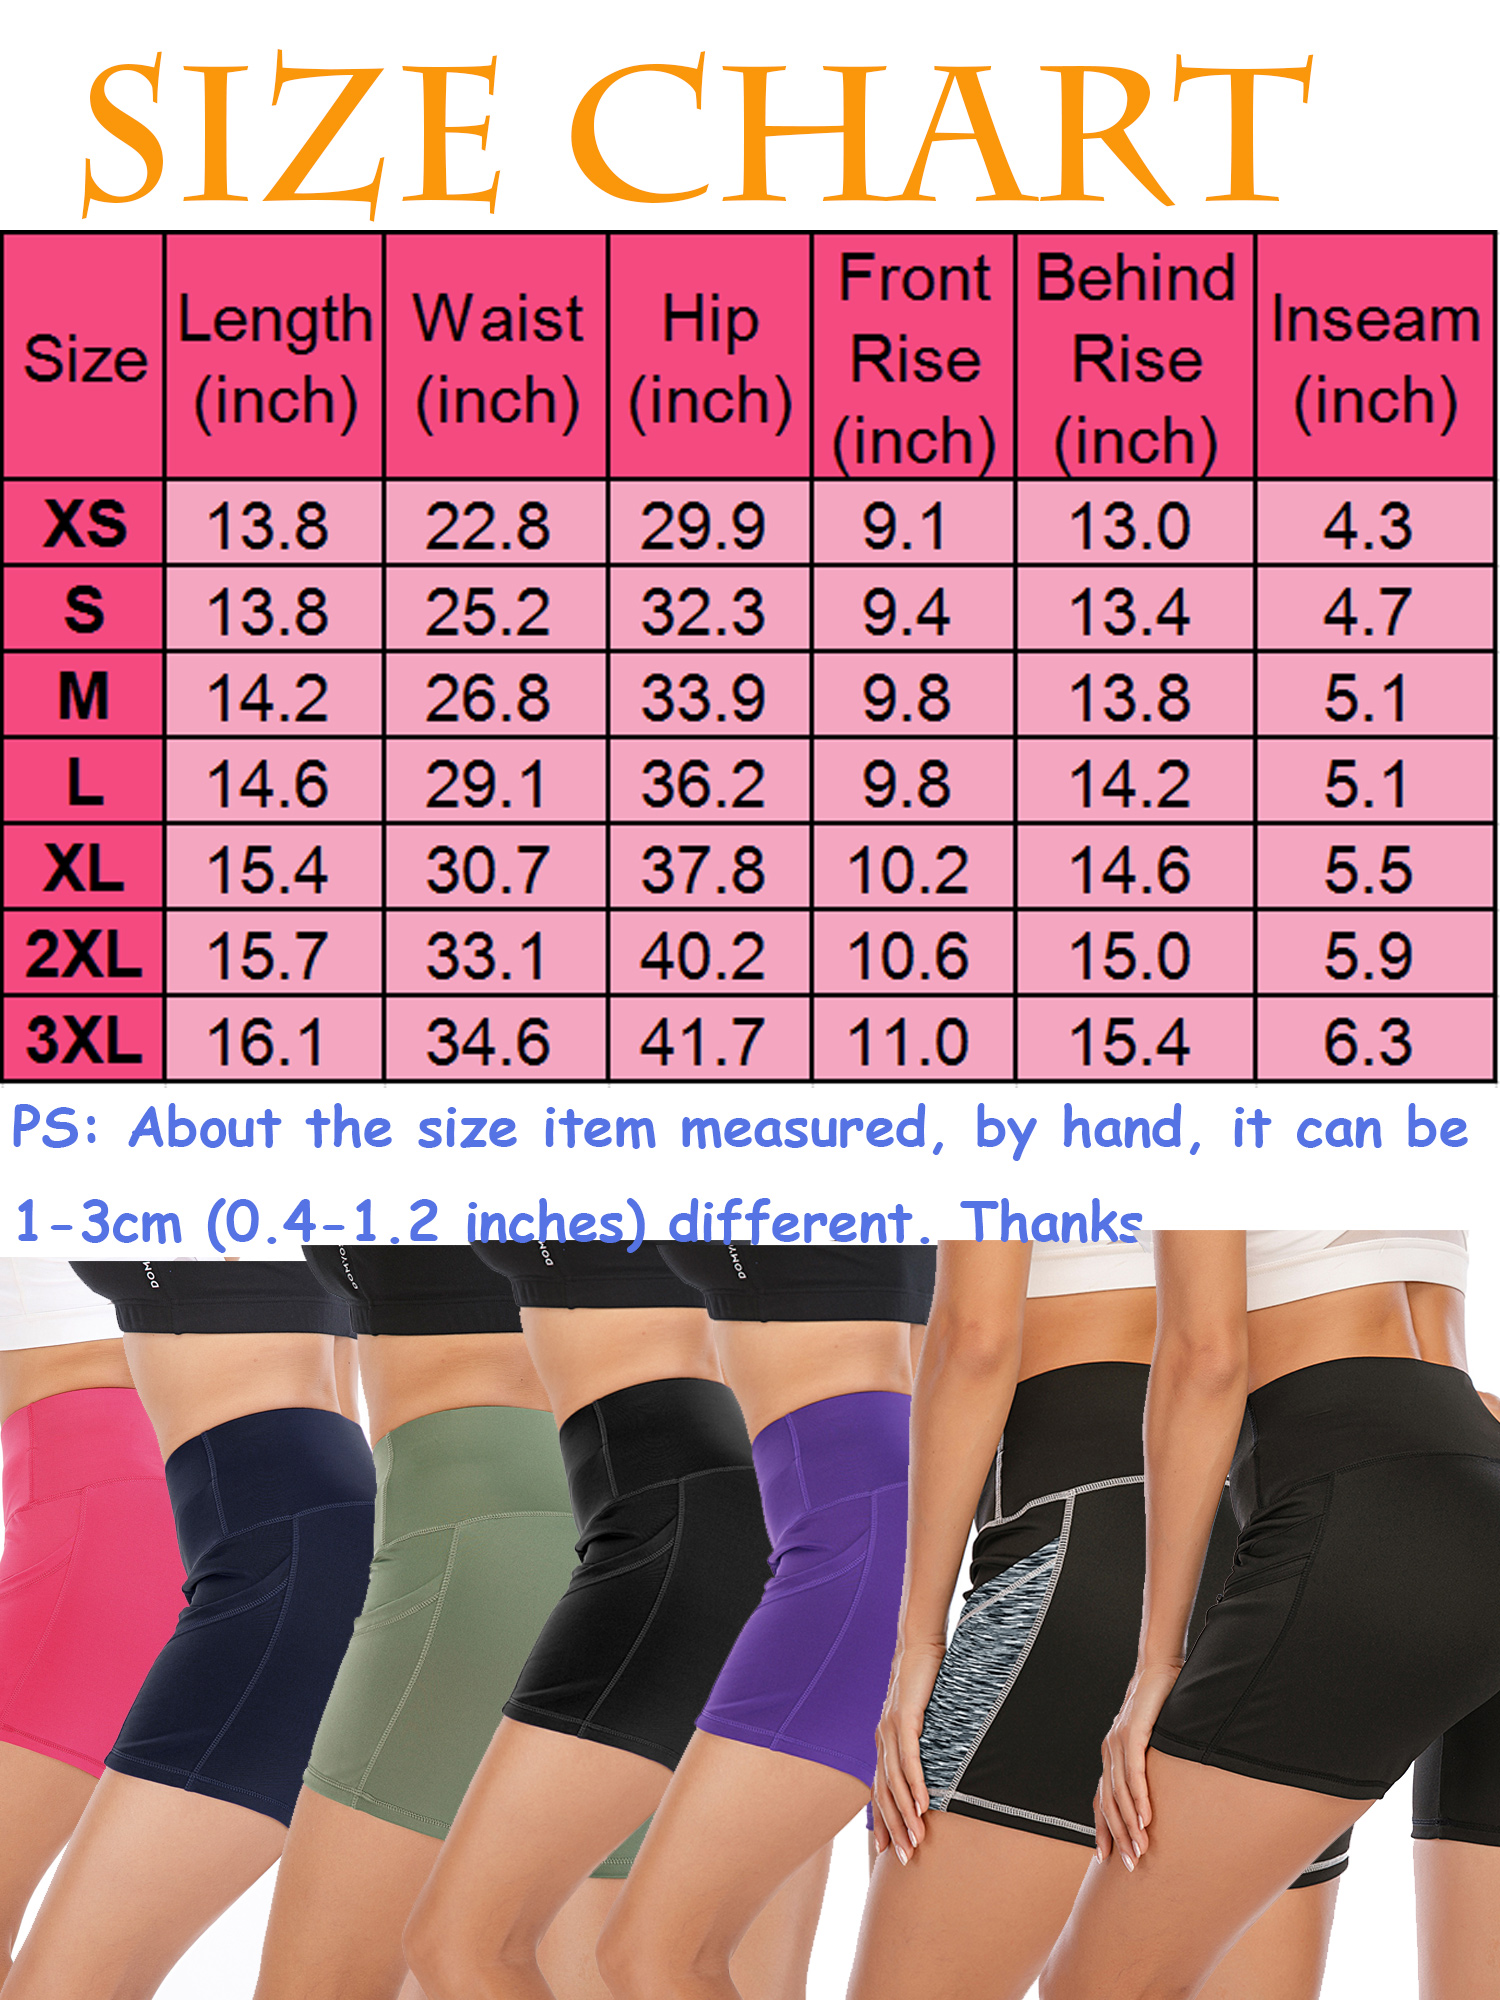 YouLoveIt Womens Yoga Shorts Butt Lifting Yoga Shorts High Waist Tummy Control Yoga Leggings Solid Color Yoga Running Shorts Yoga Short Leggings Stretch Ruched Hot Shorts with Pockets - image 3 of 6